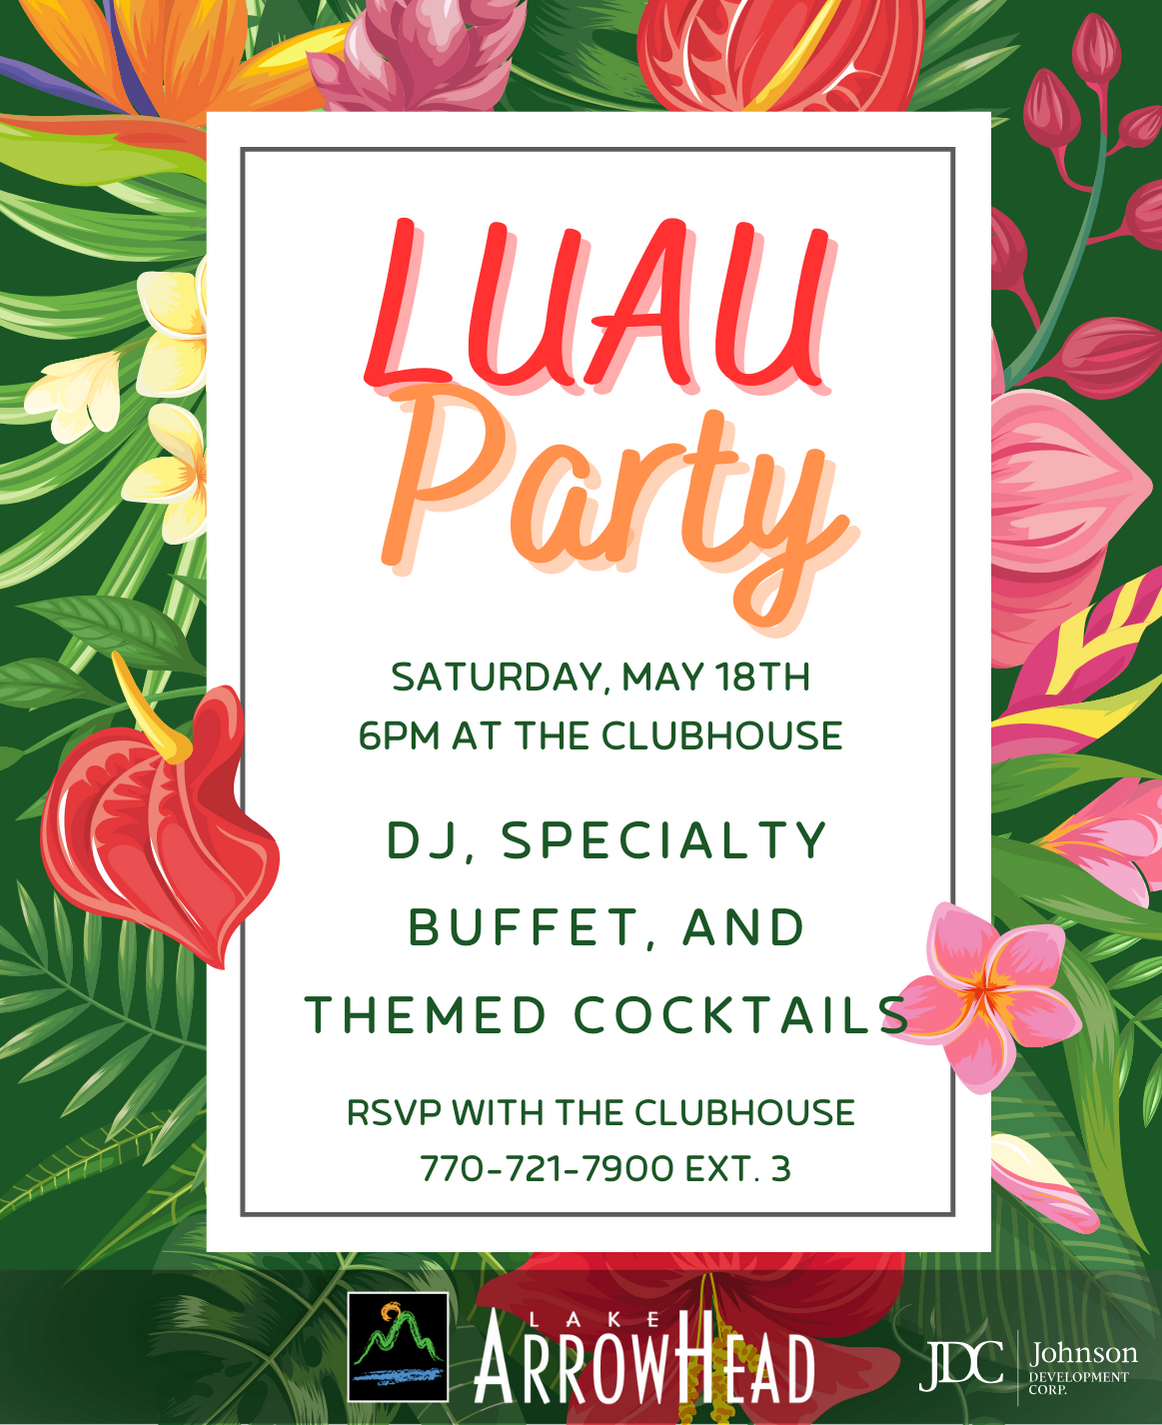 Luau Party May 18th